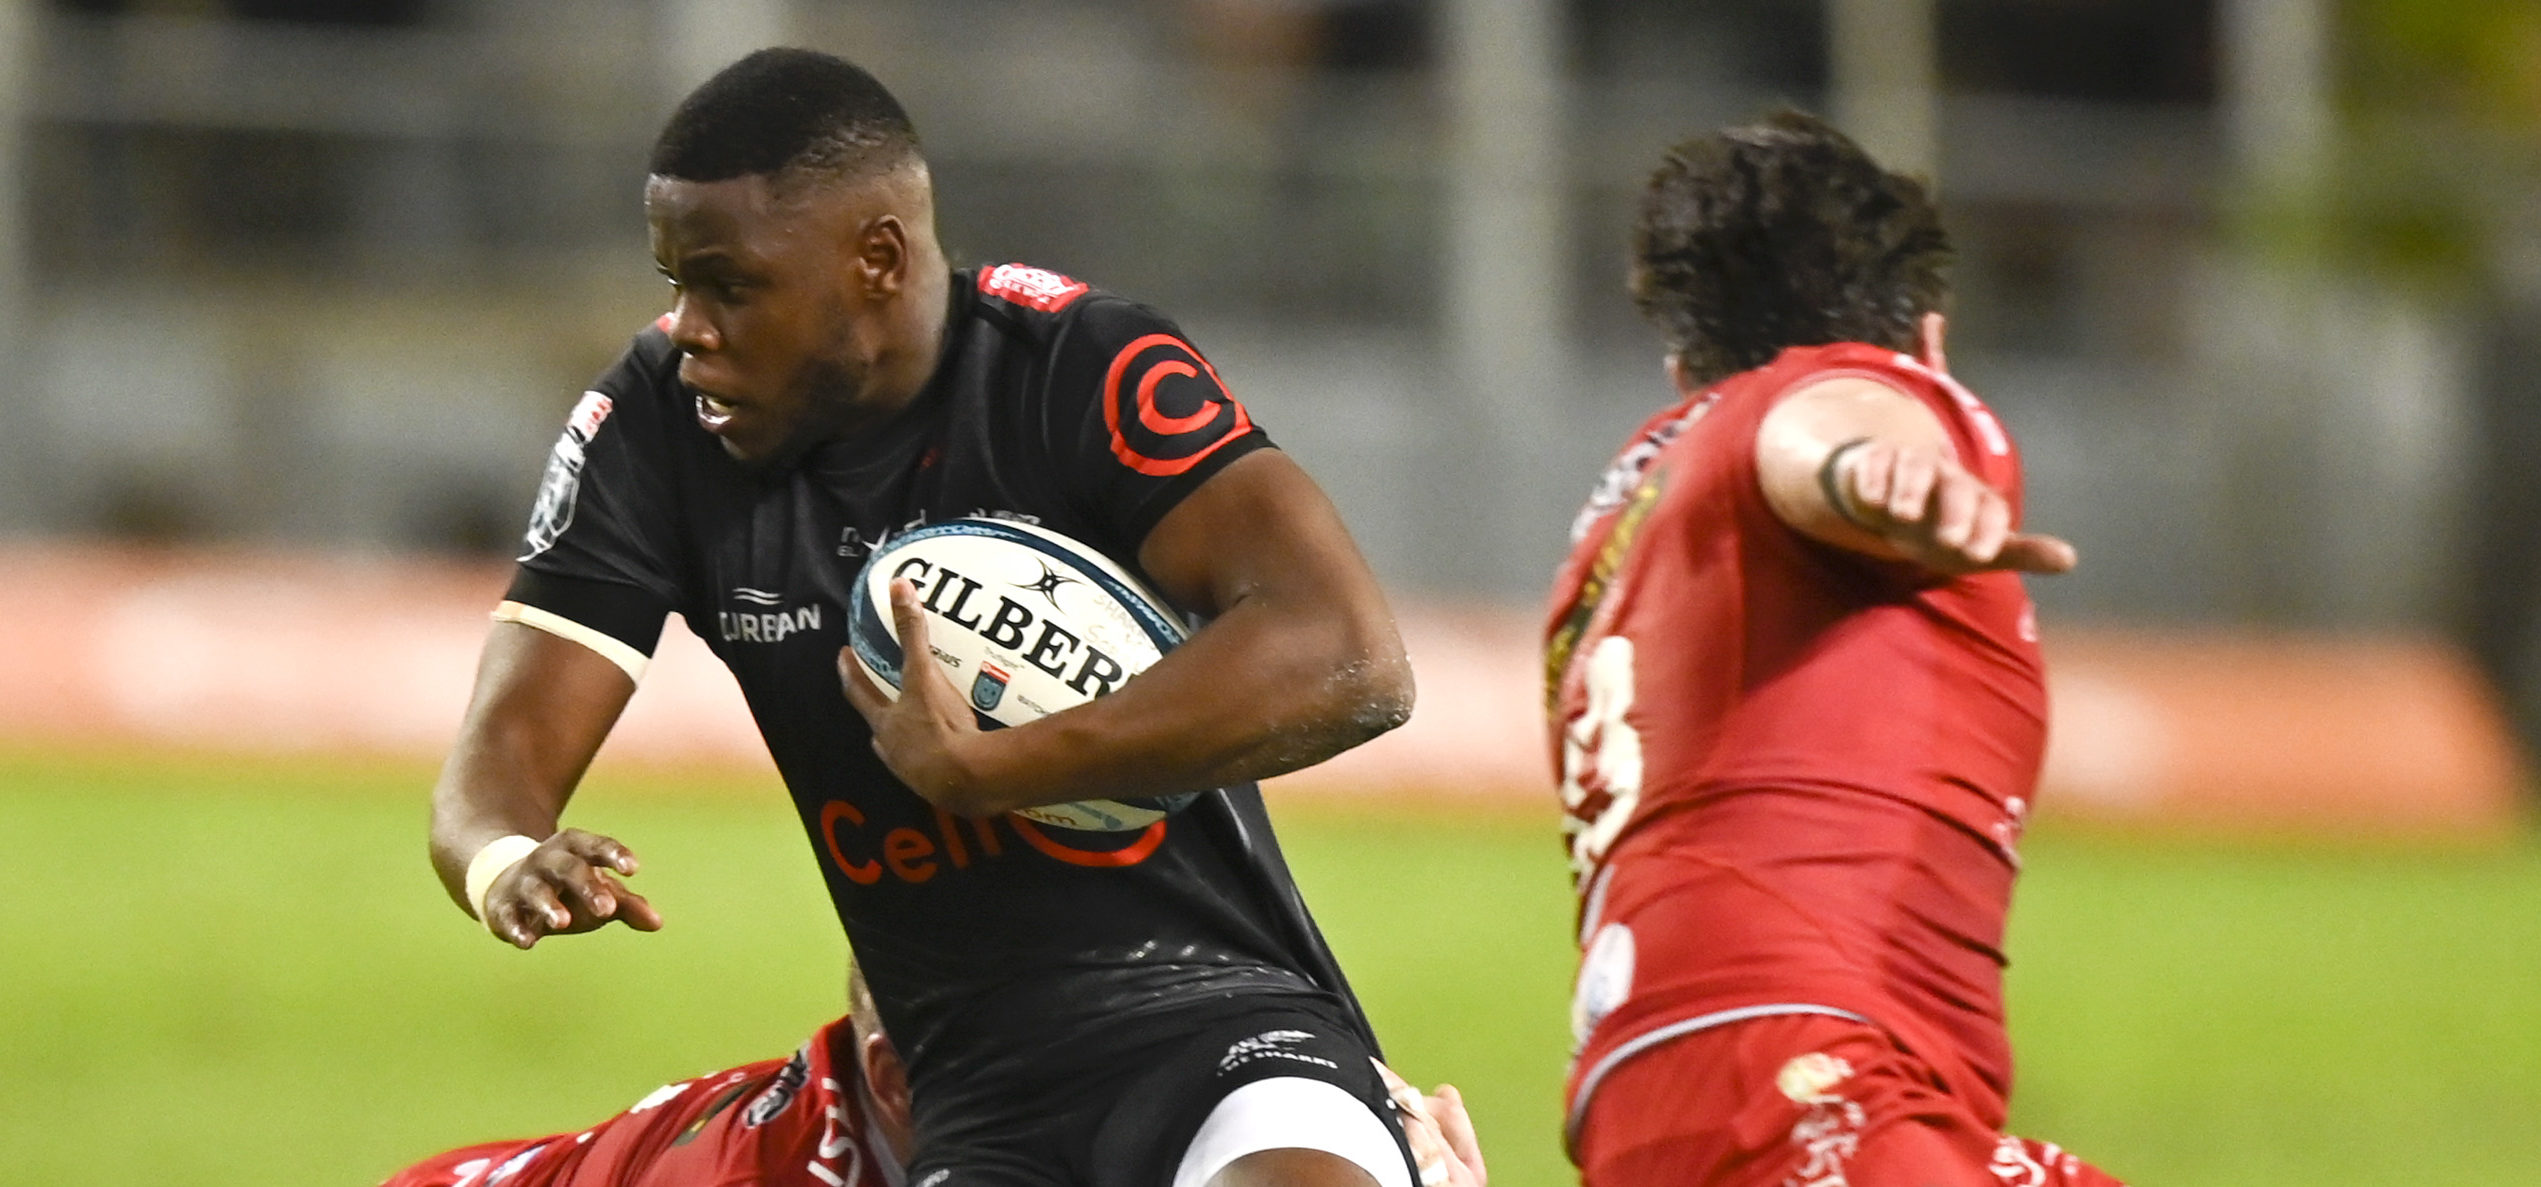 Aphelele Fassi of the Sharks during the United Rugby Championship 2021/22 match between the Sharks and Llanelli Scarlets held at Kings Park in Durban on 11 March 2022 ©Gerhard Duraan/BackpagePix